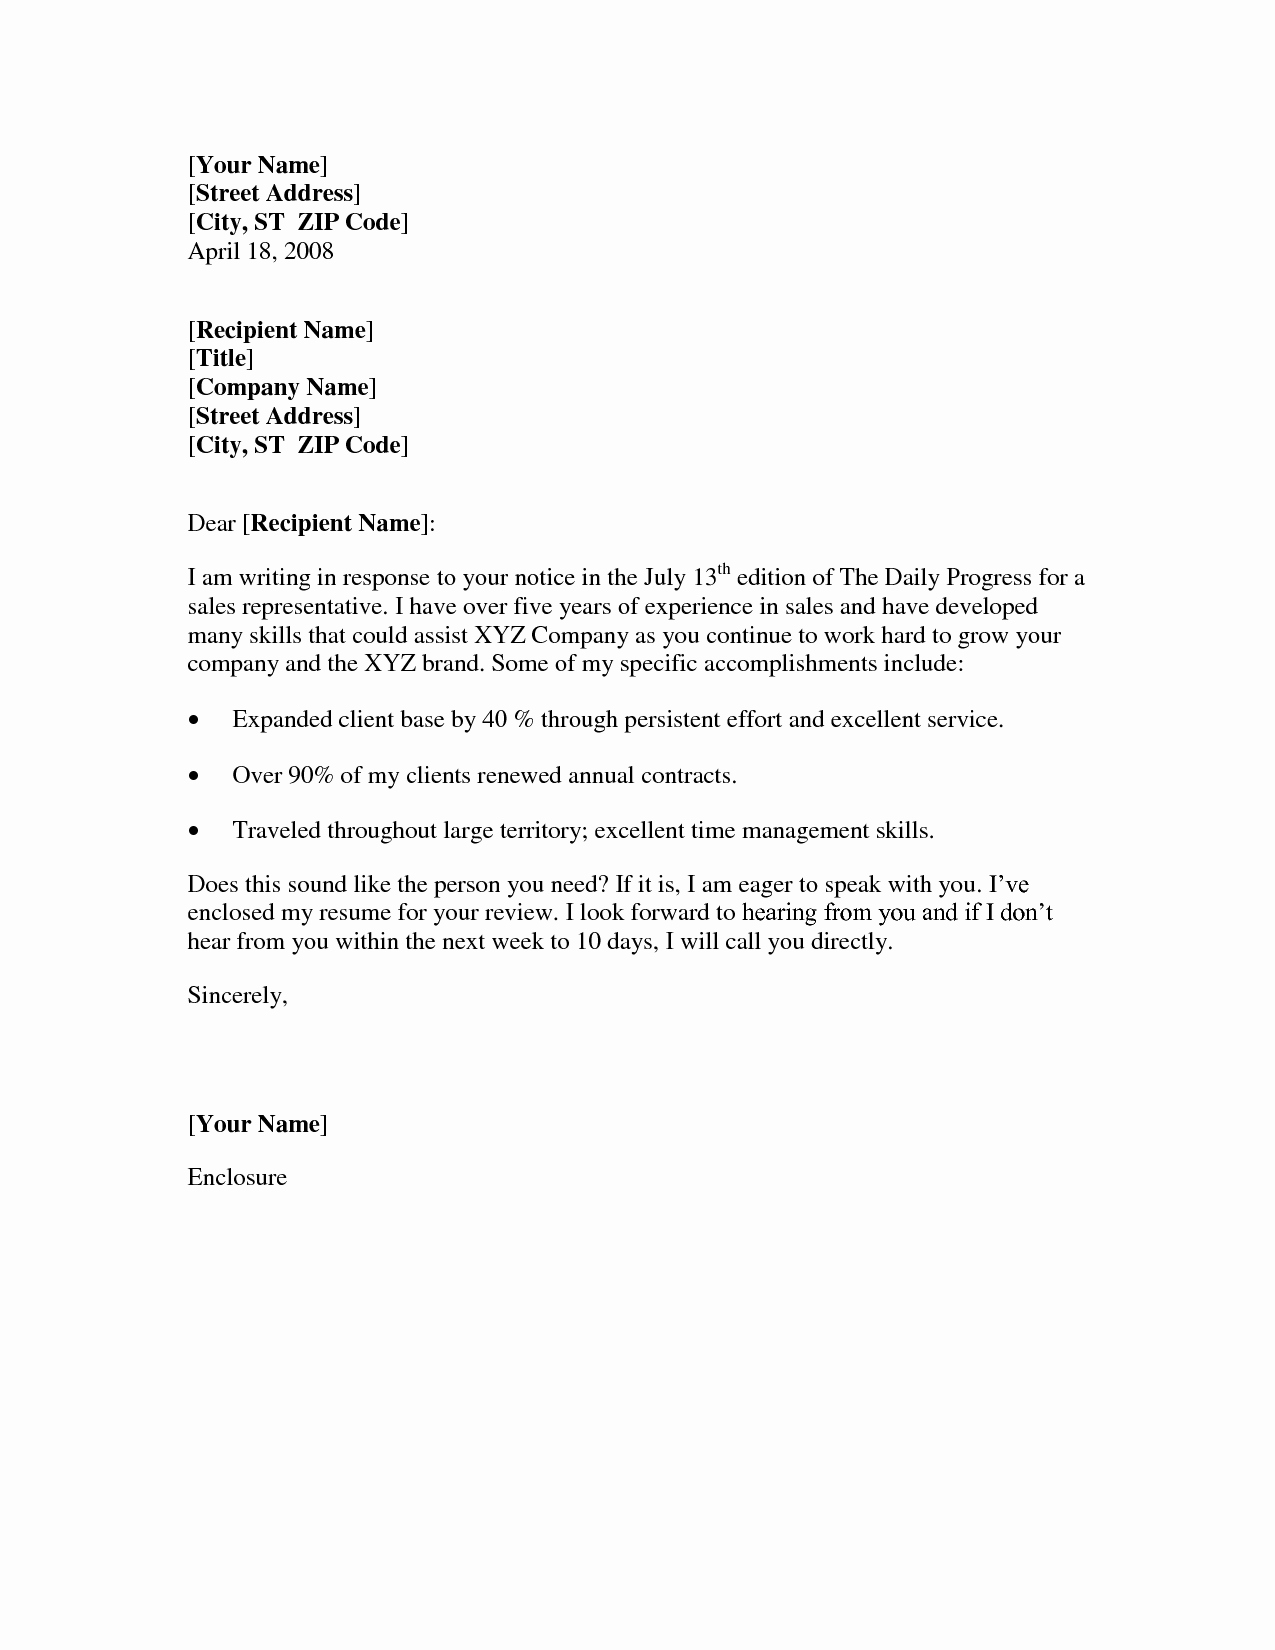 Cover Letter Basic format Best Template Collection